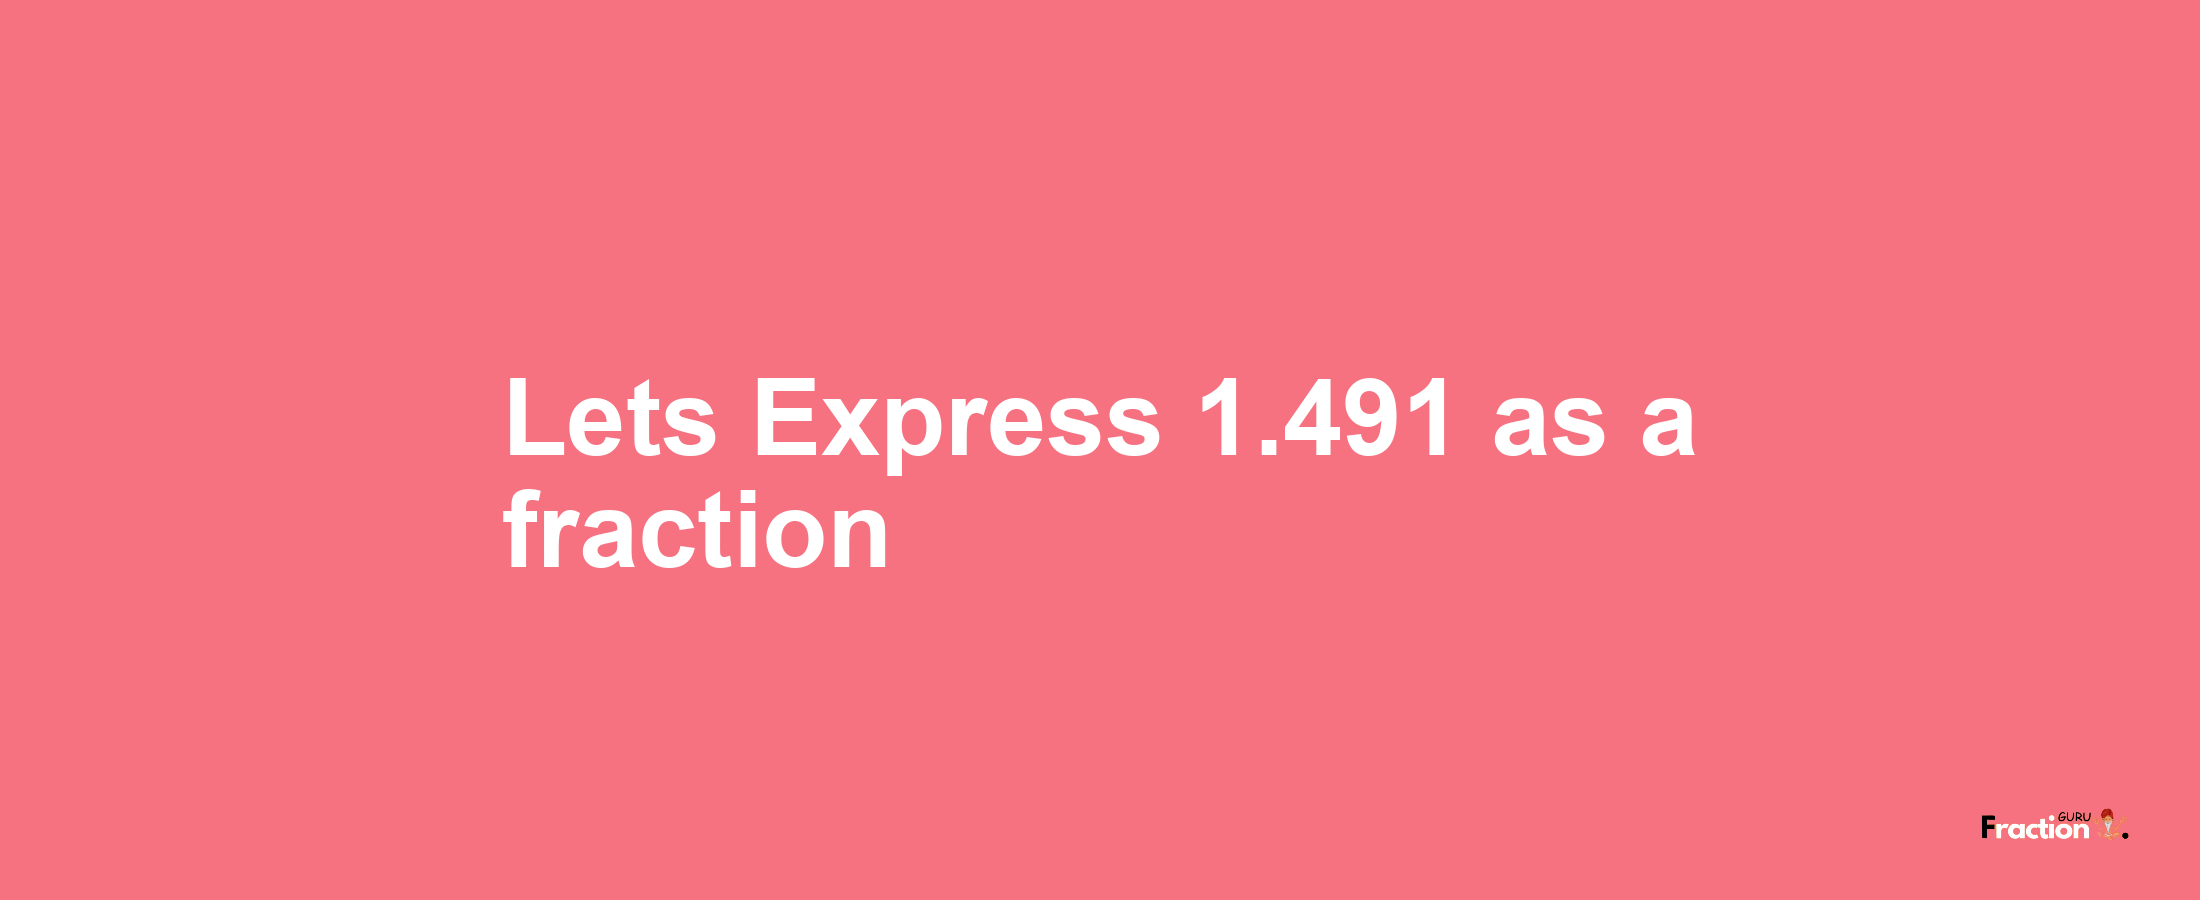 Lets Express 1.491 as afraction